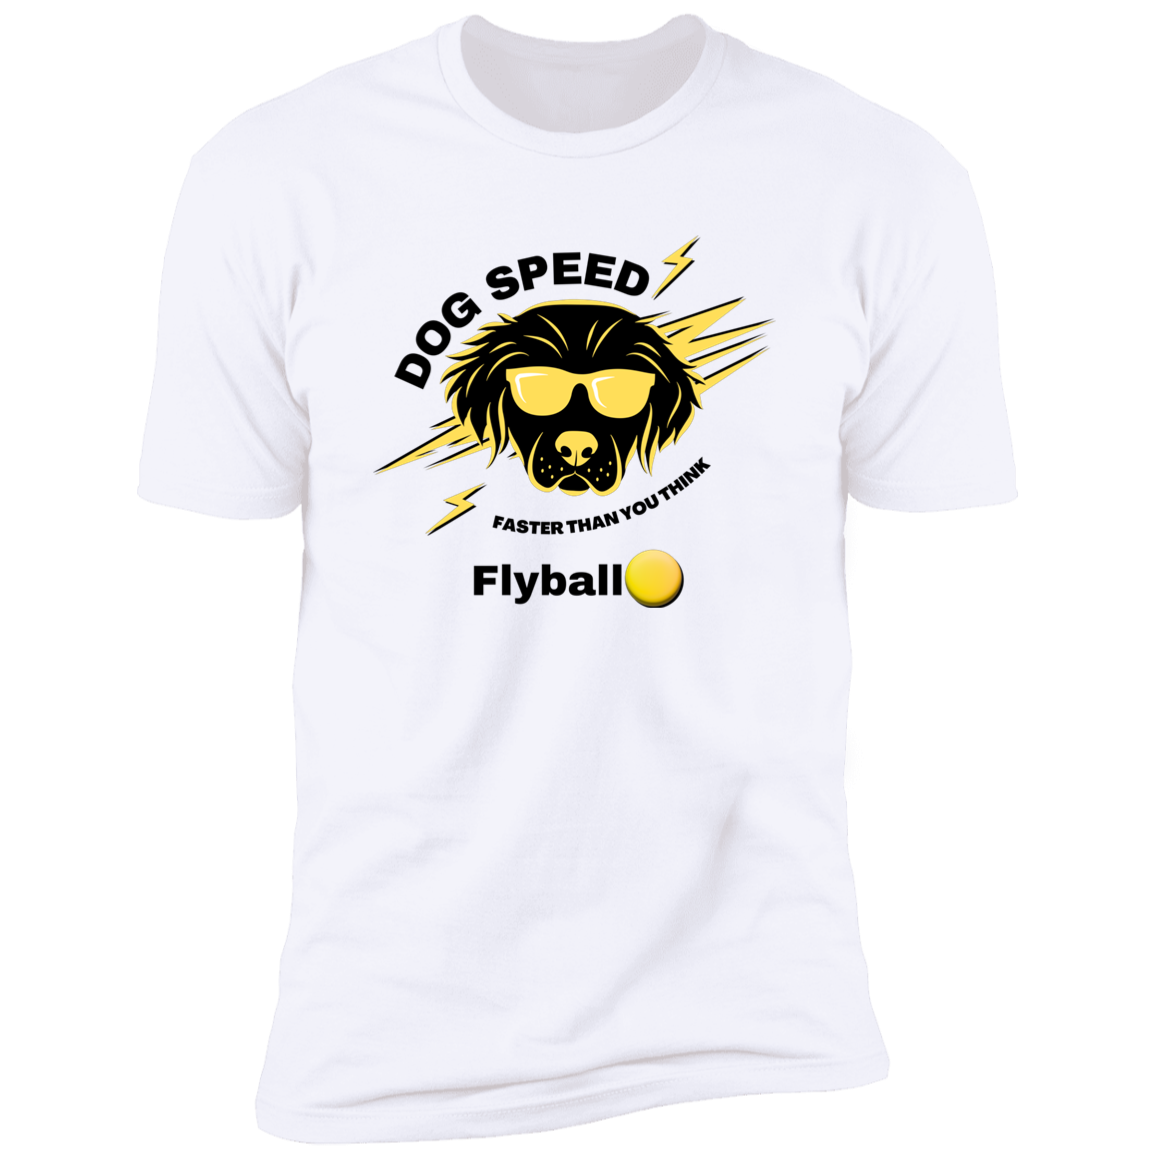 Dog Speed Faster Than You Think Flyball T-shirt, Flyball shirt dog shirt for humans, in white